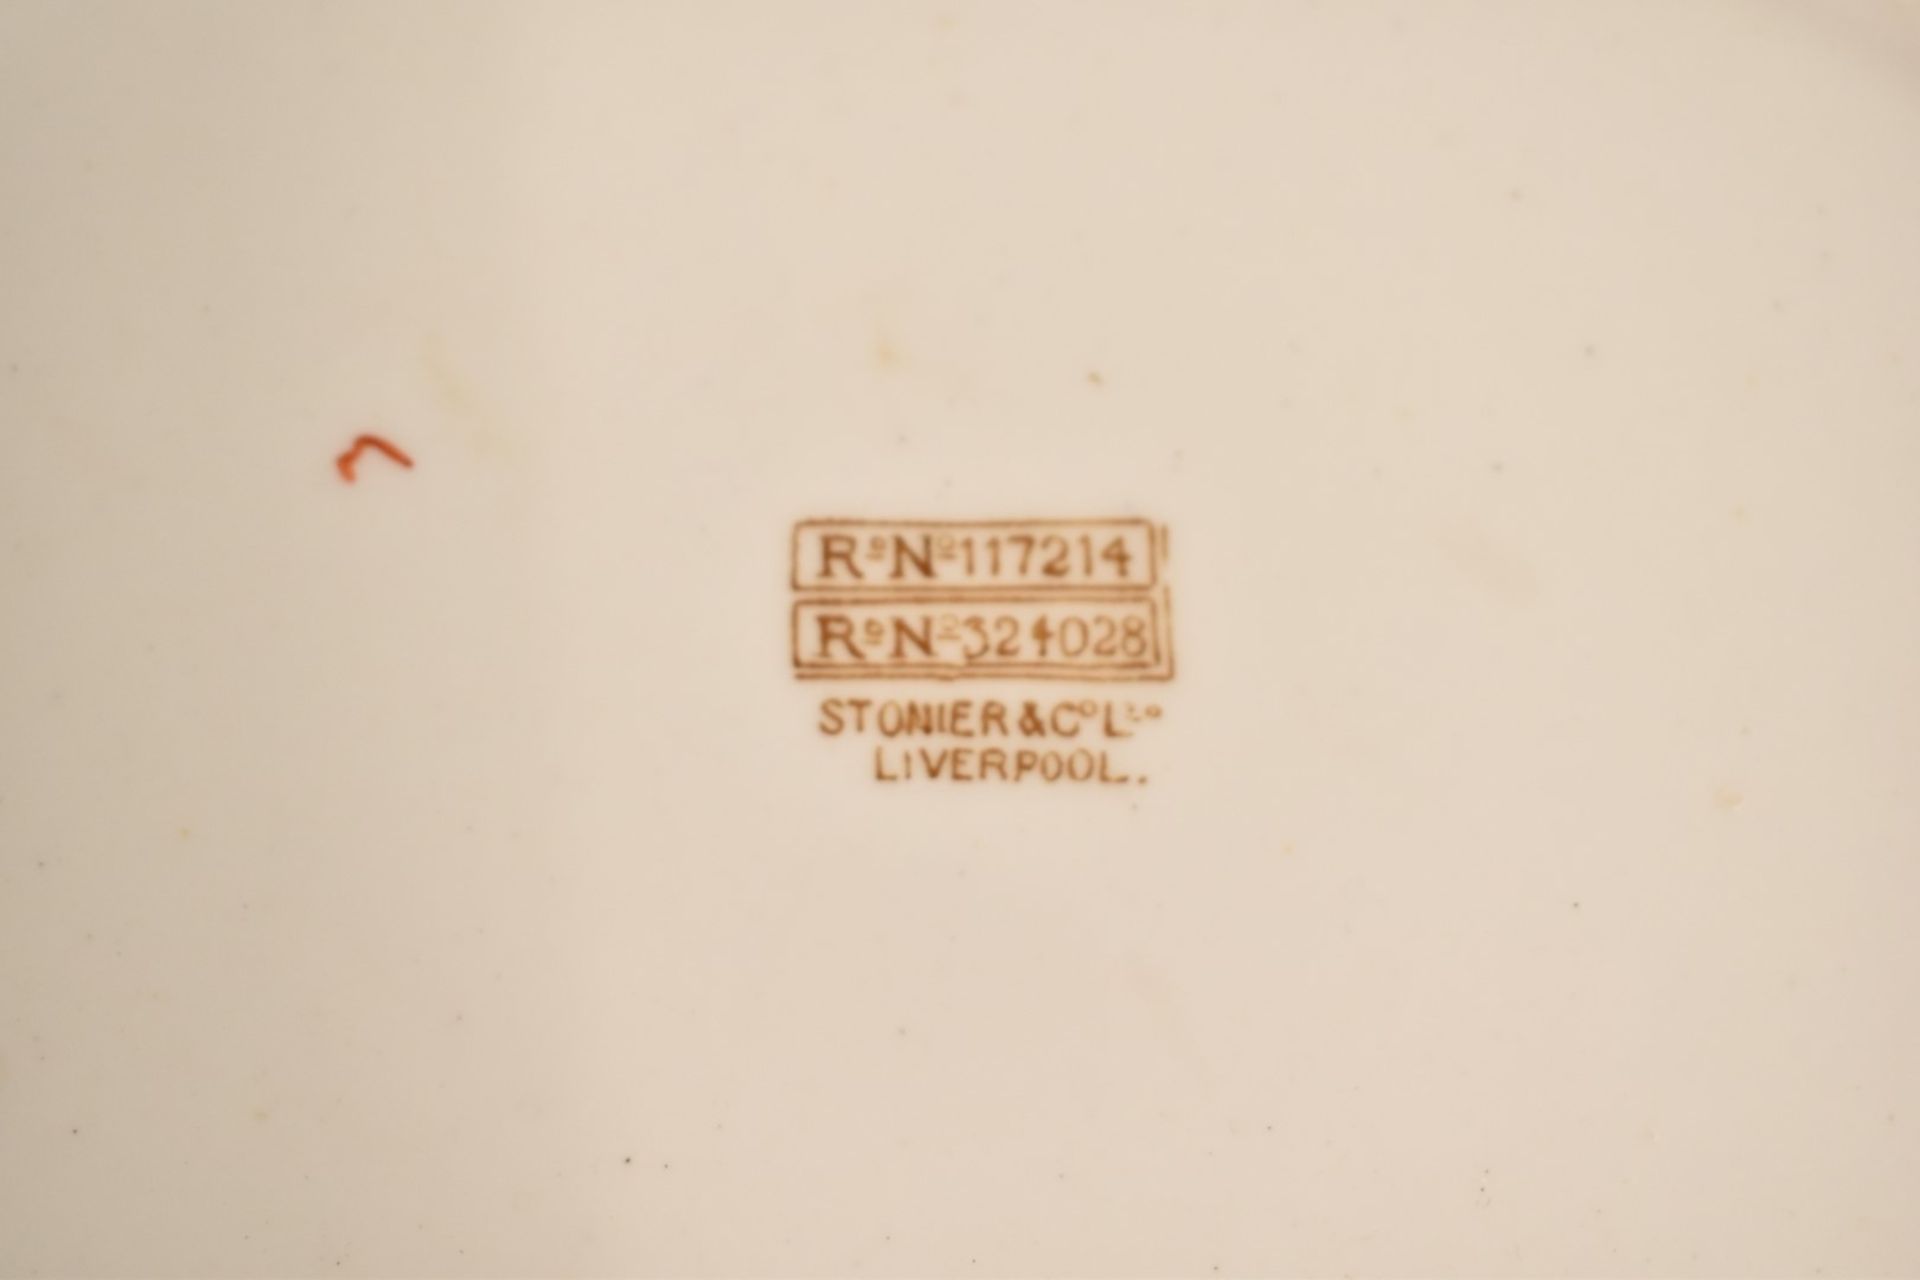 Red Star Line oval bowl with Stonier & Co. Ltd Liverpool to base, White Star Line transfer visible - Image 5 of 5